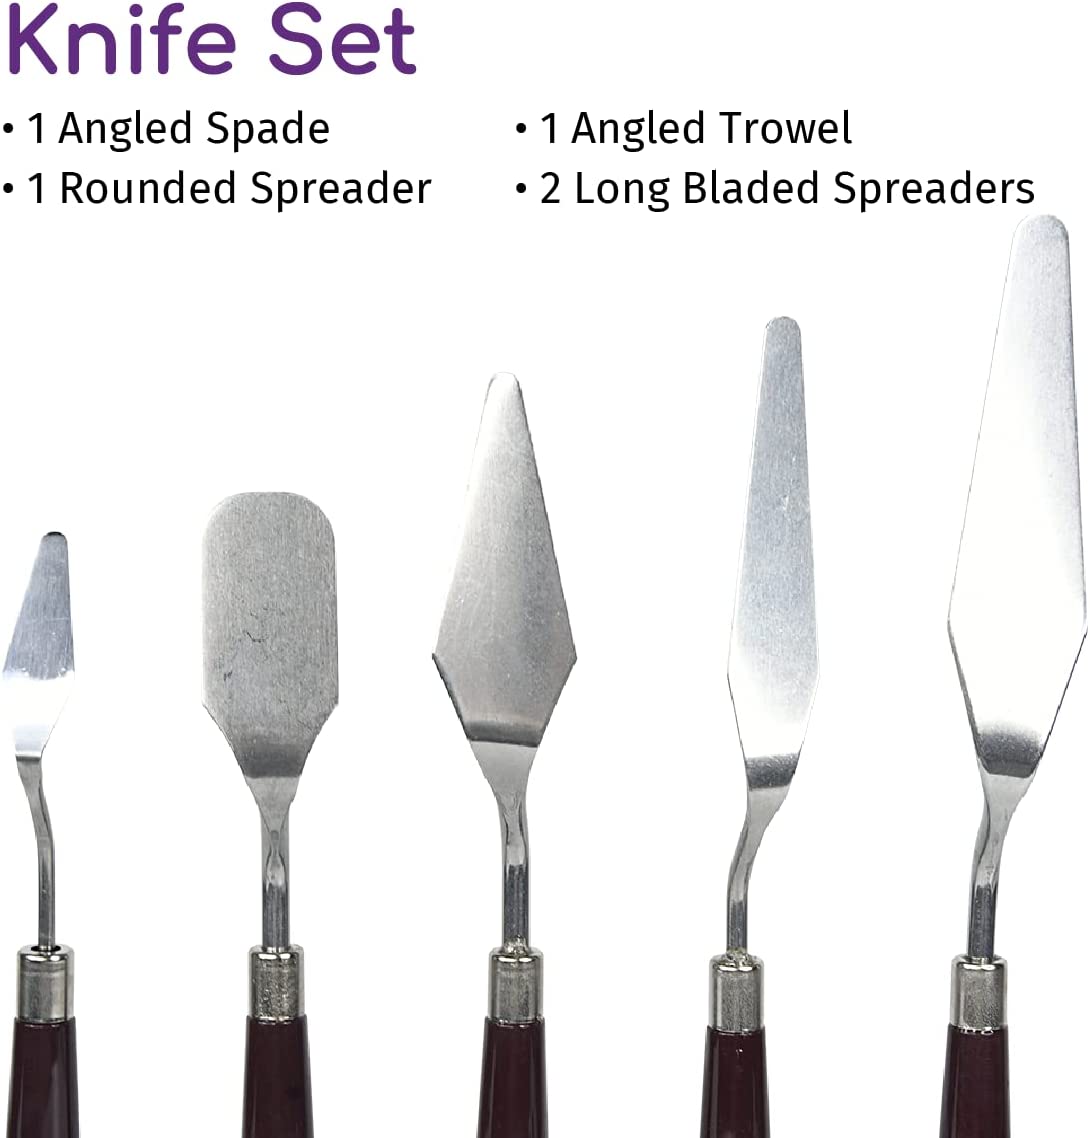 5 Pieces Stainless Steel Palette Spatula Set